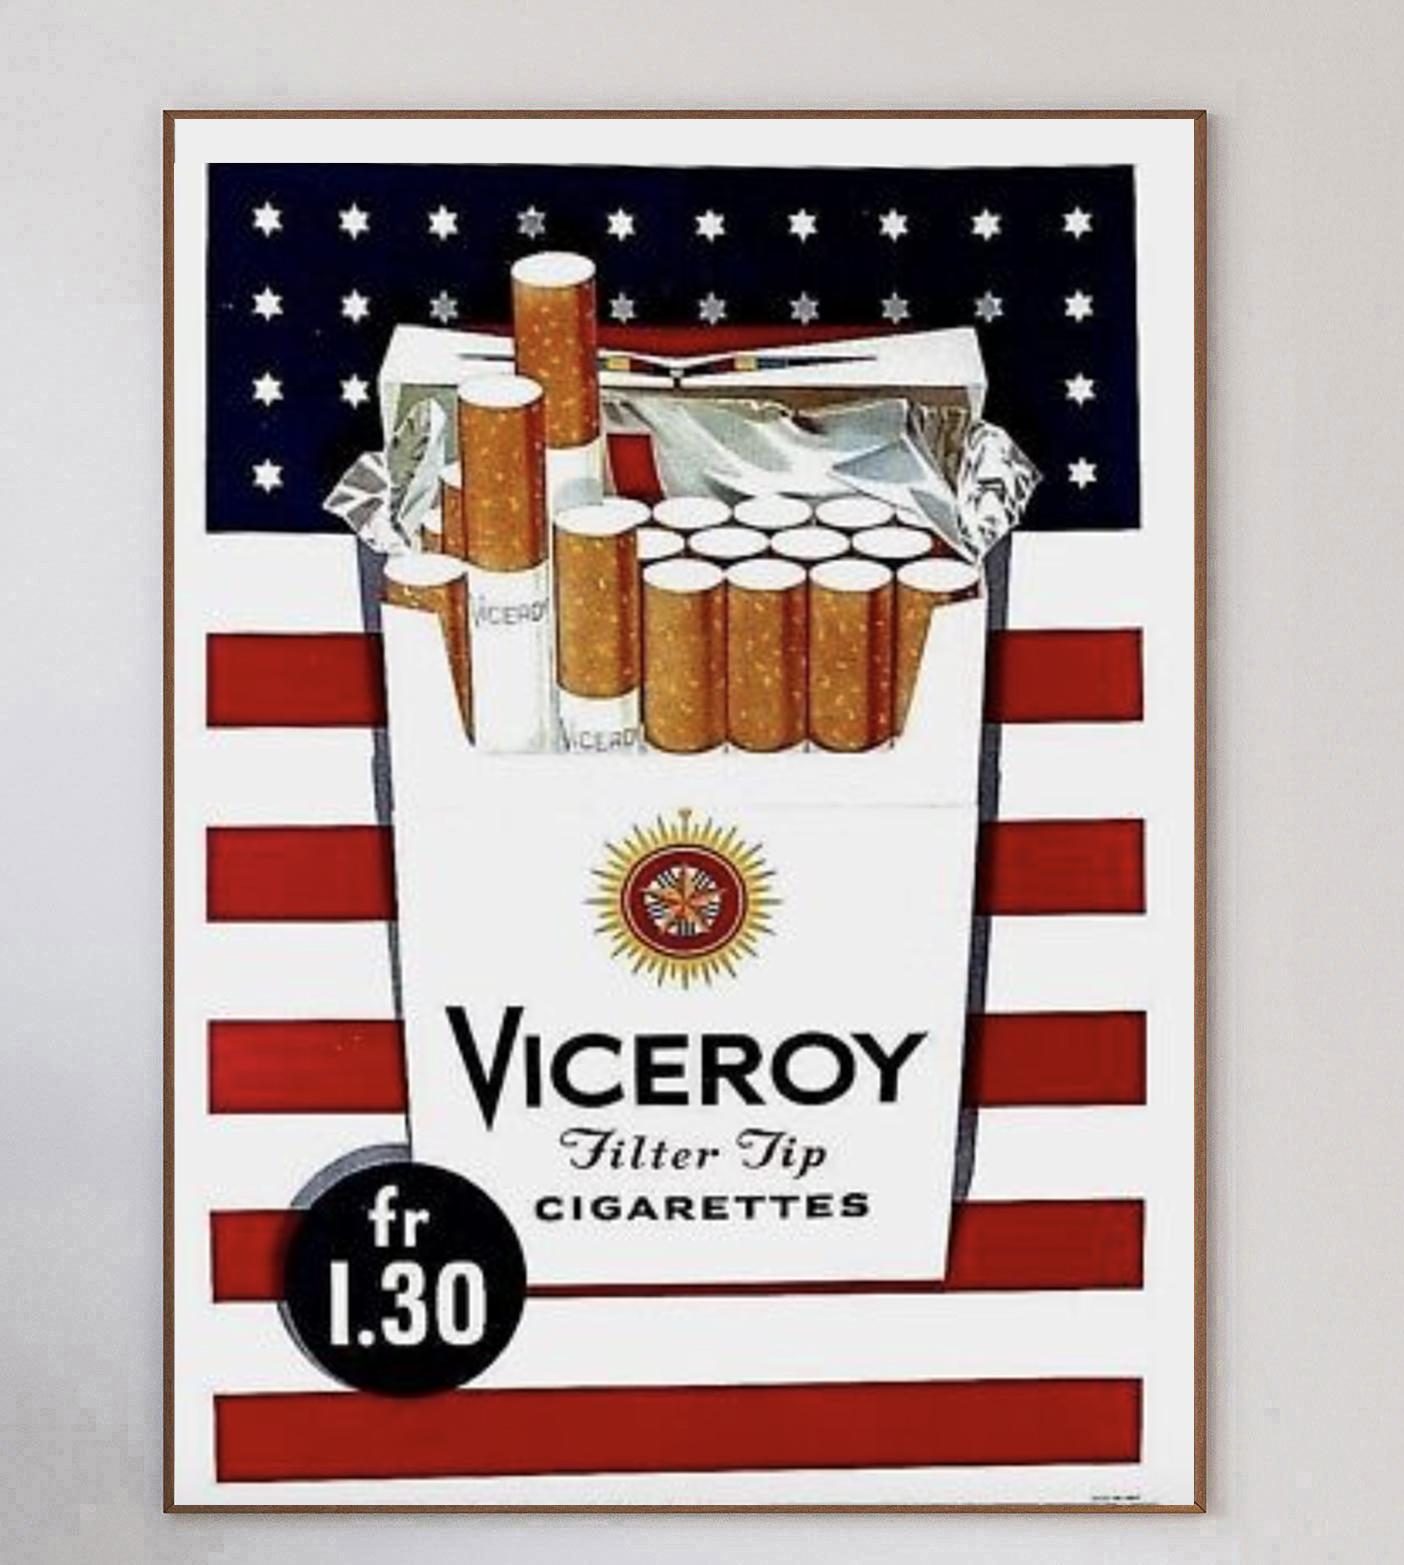 Introduced in 1936, this poster for American cigarette brand Viceroy was created in 1945. Depicting a pack of cigarettes in front of the American flag, the Swiss release poster shows the price of the pack was 1.30Fr. 

This brilliant and